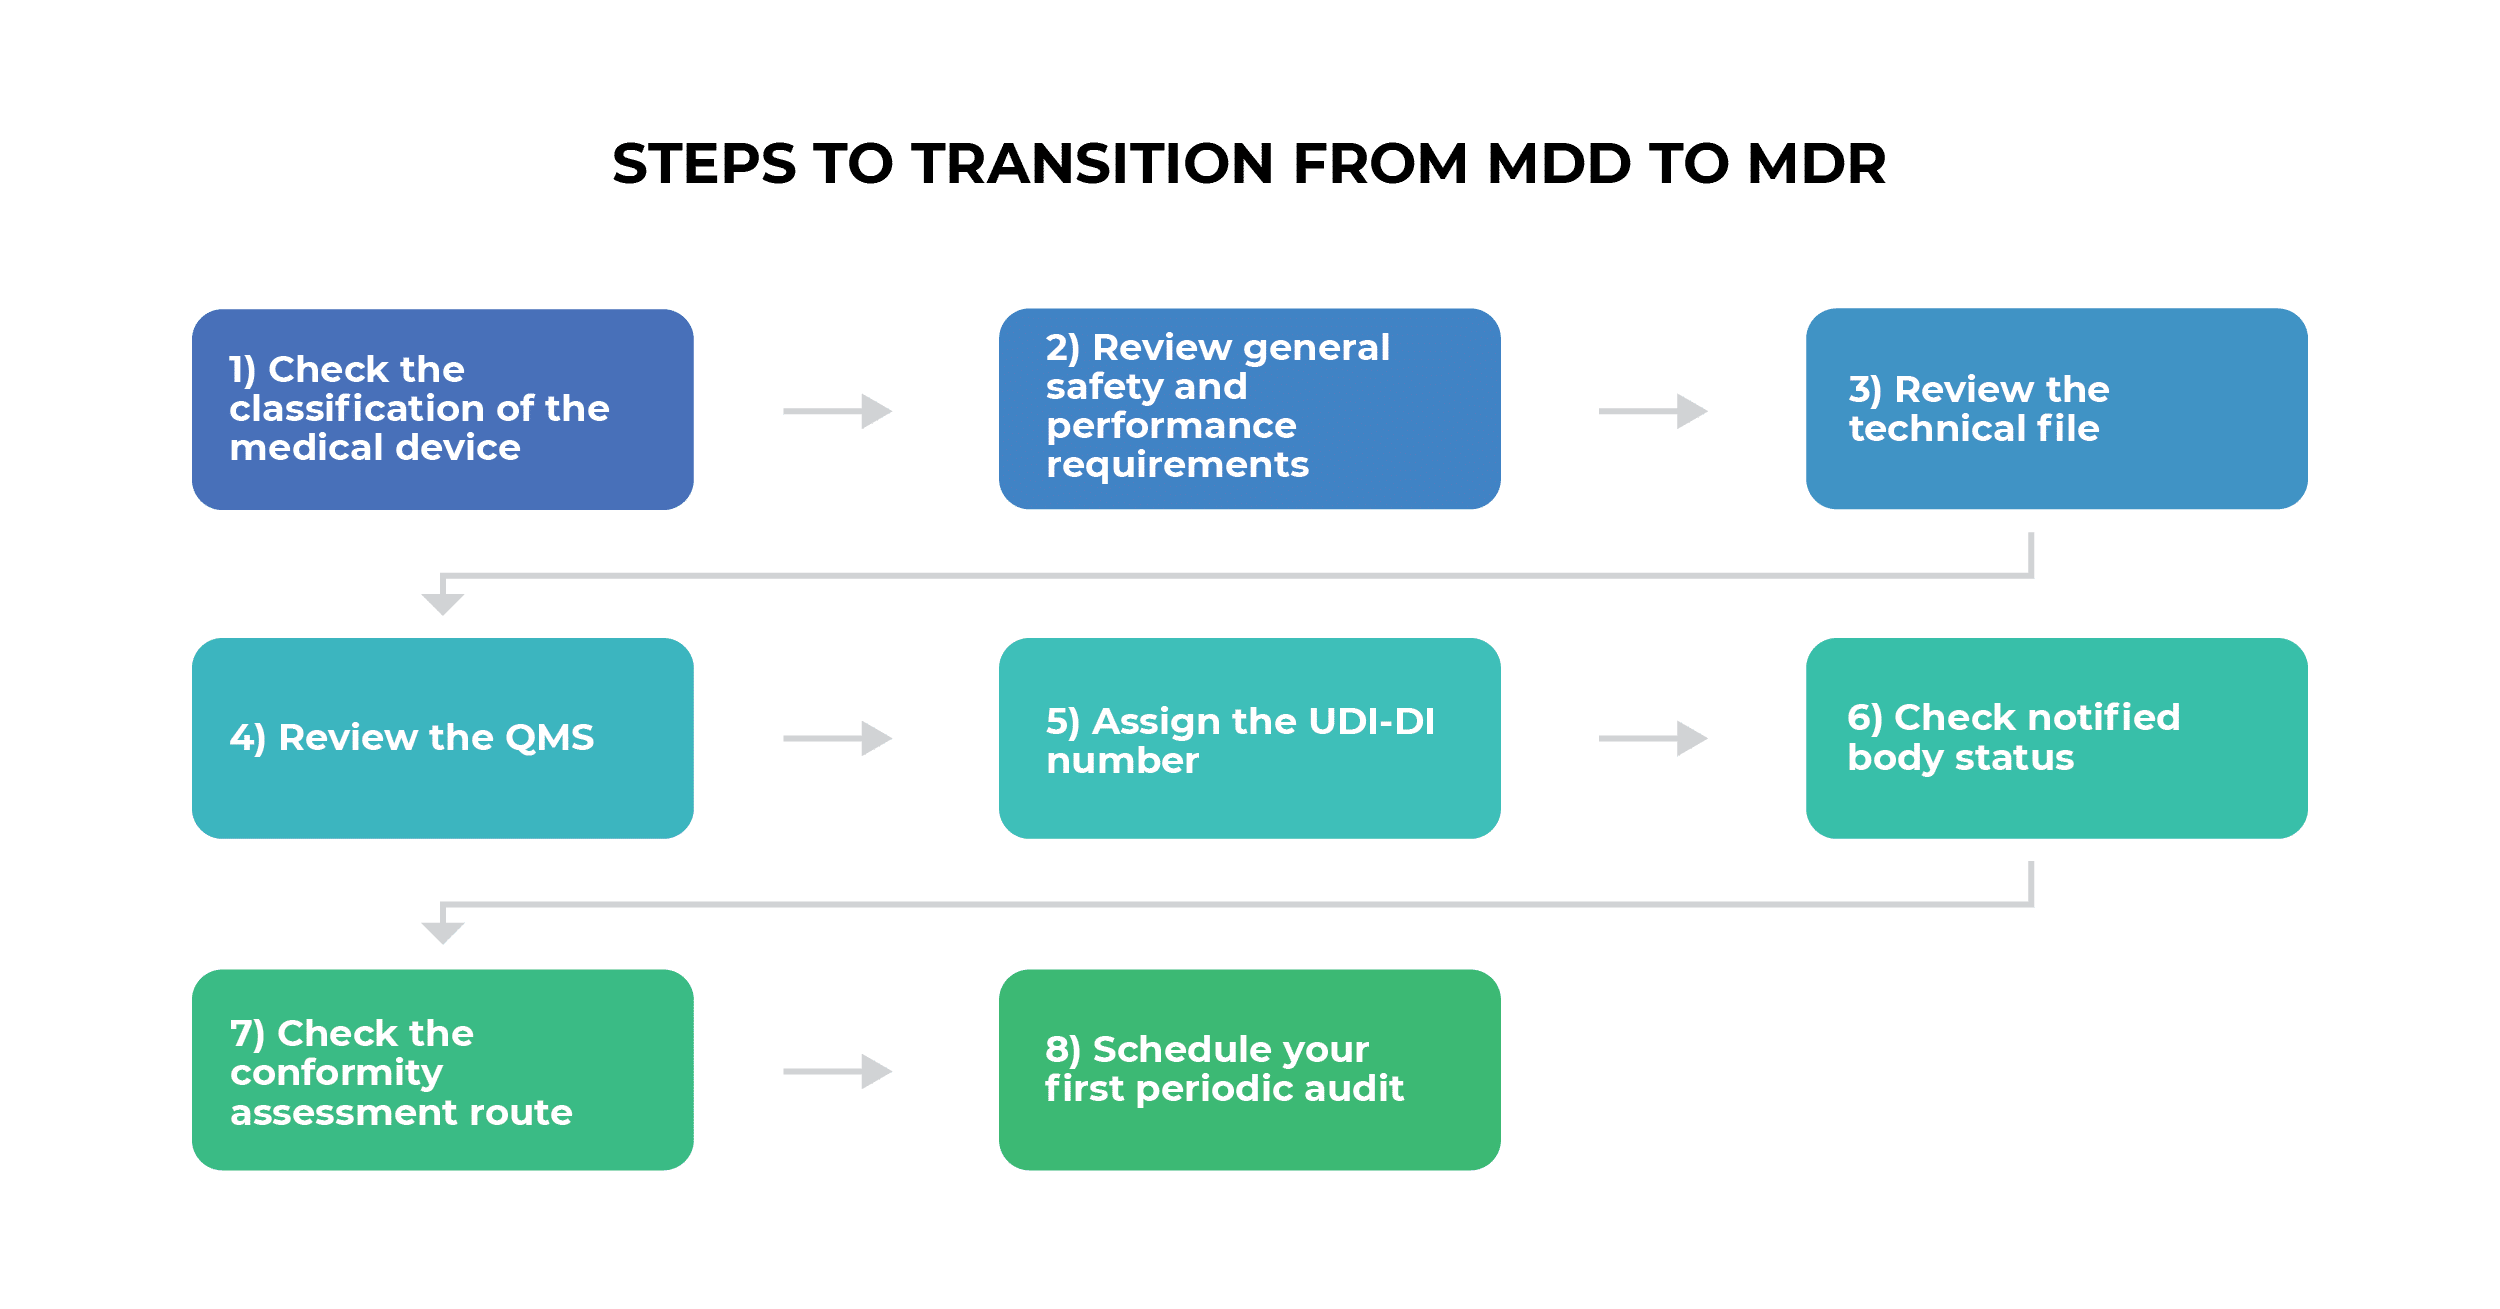 Steps to transition from MDD to MDR